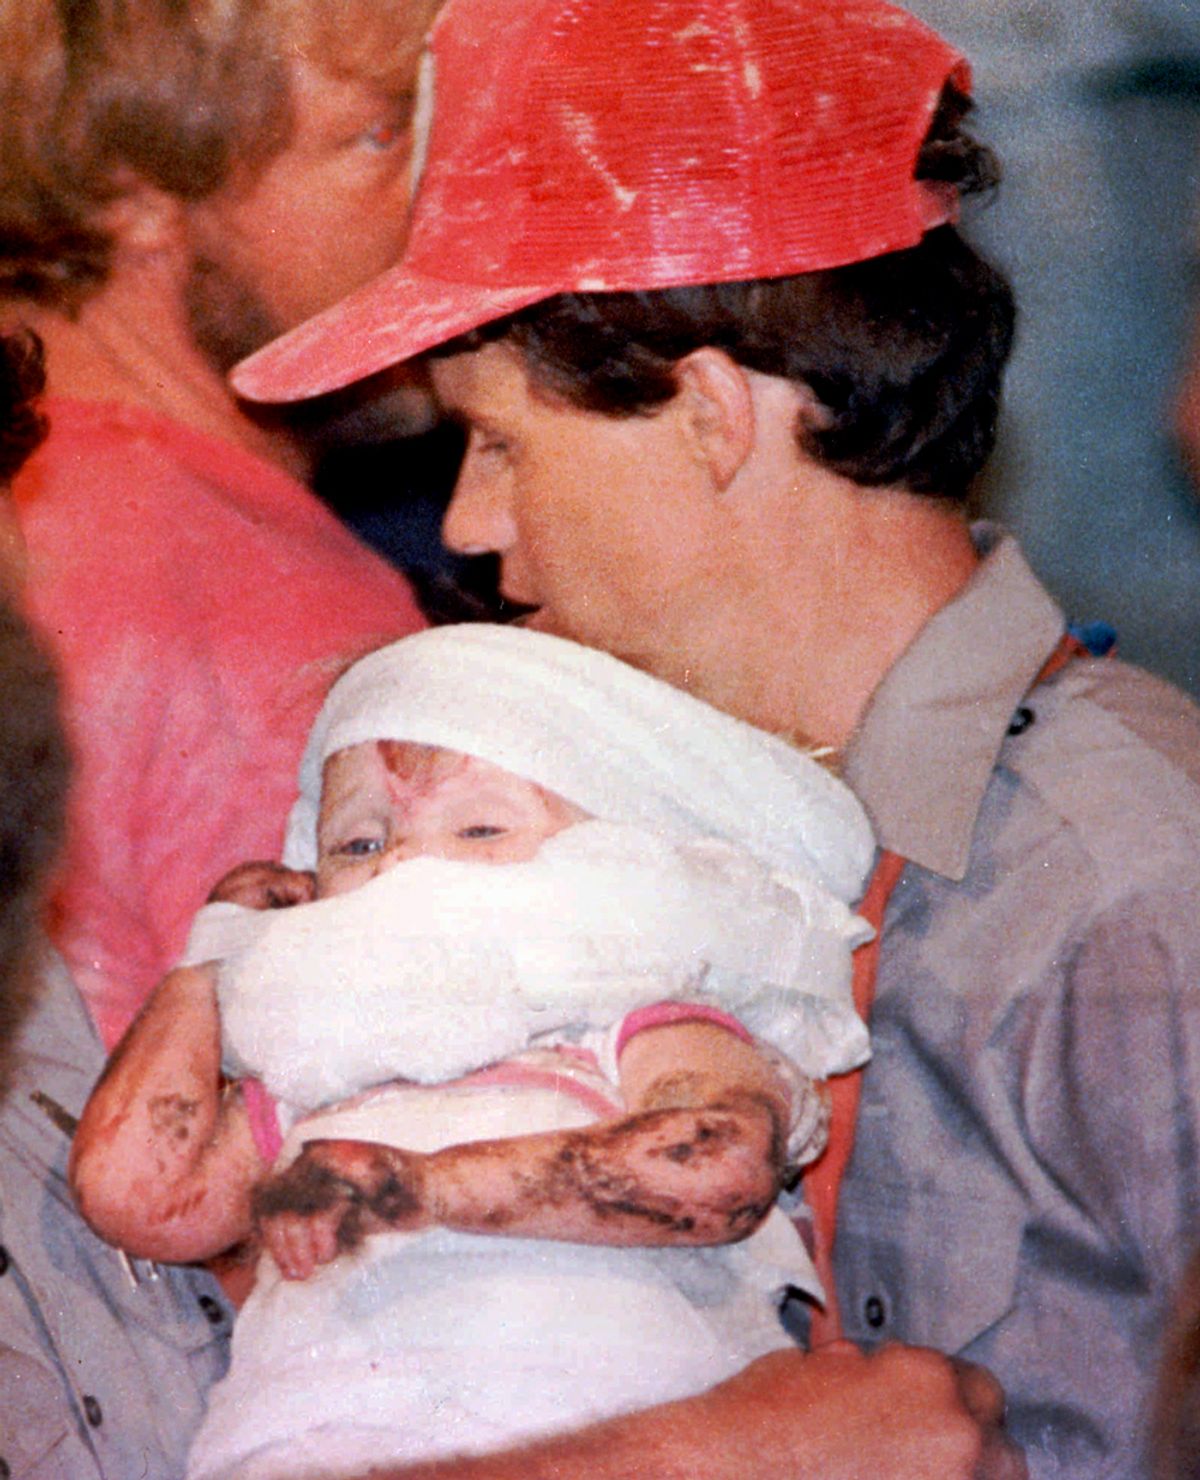 Rescue worker carries 18-month-old Jessica McClure Oct.16,1987, shortly after she was rescued from an abandoned water well at Midland,Texas.